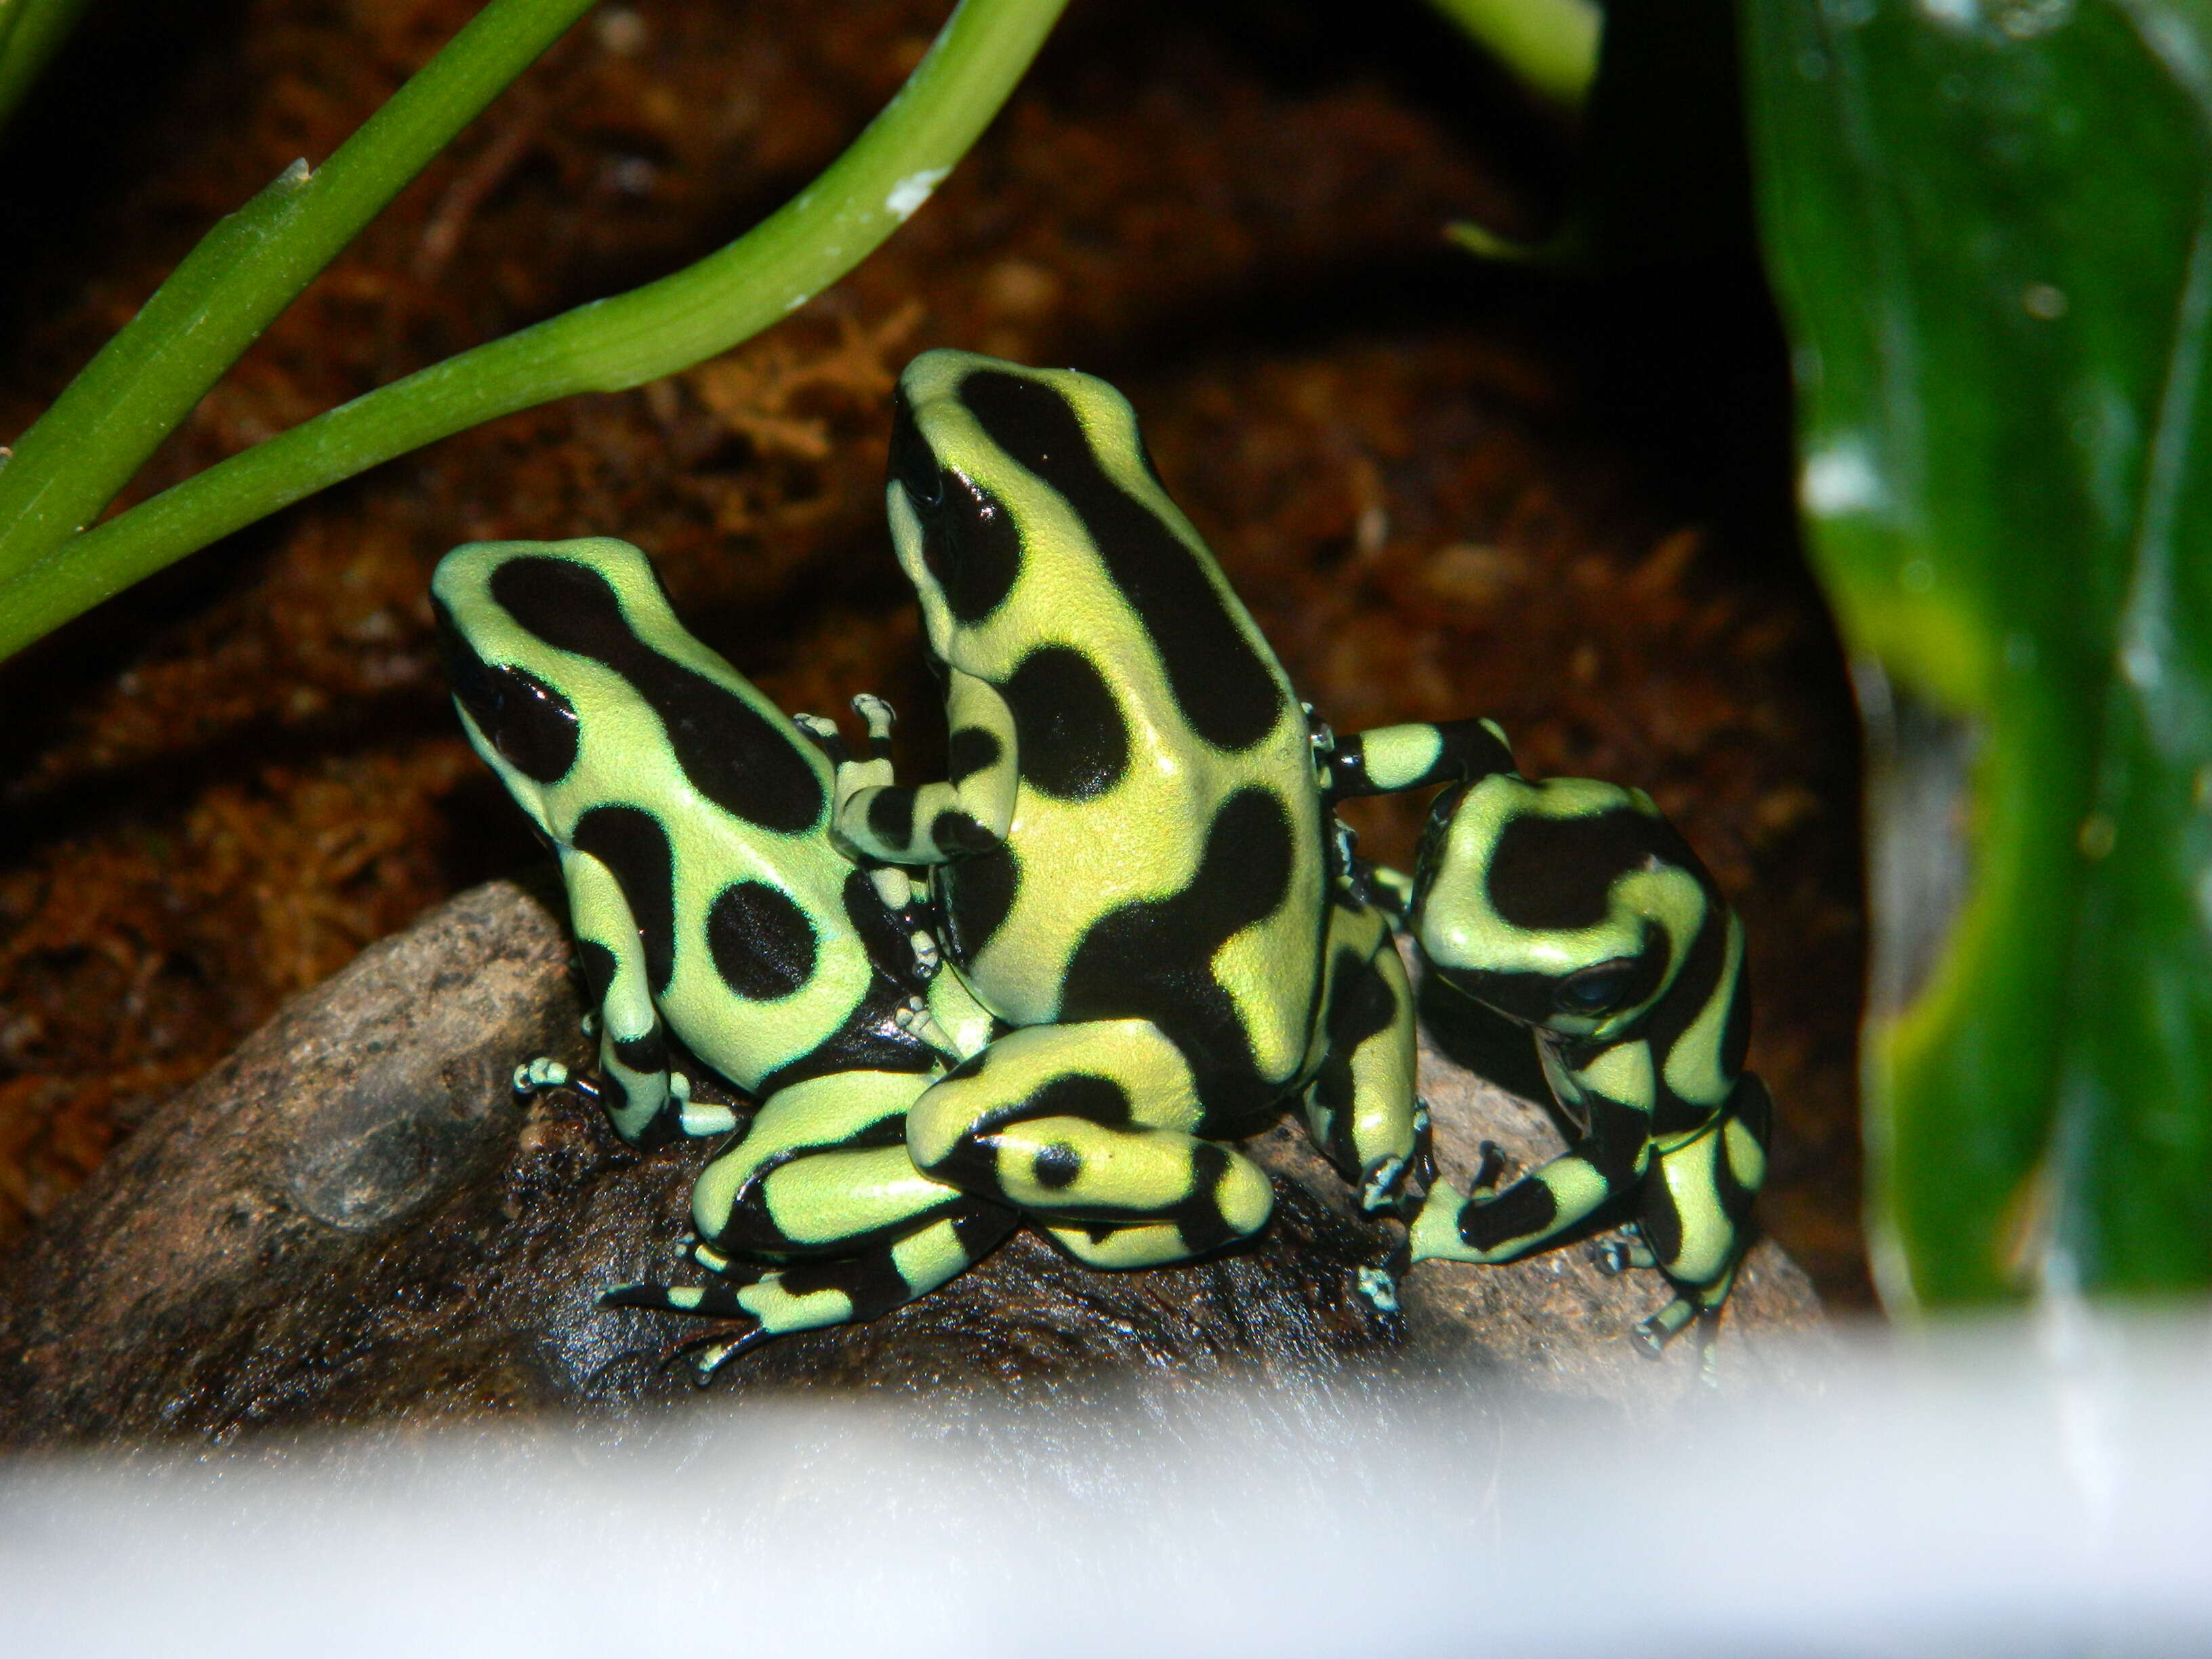 Image of Gold Arrow-poison Frog